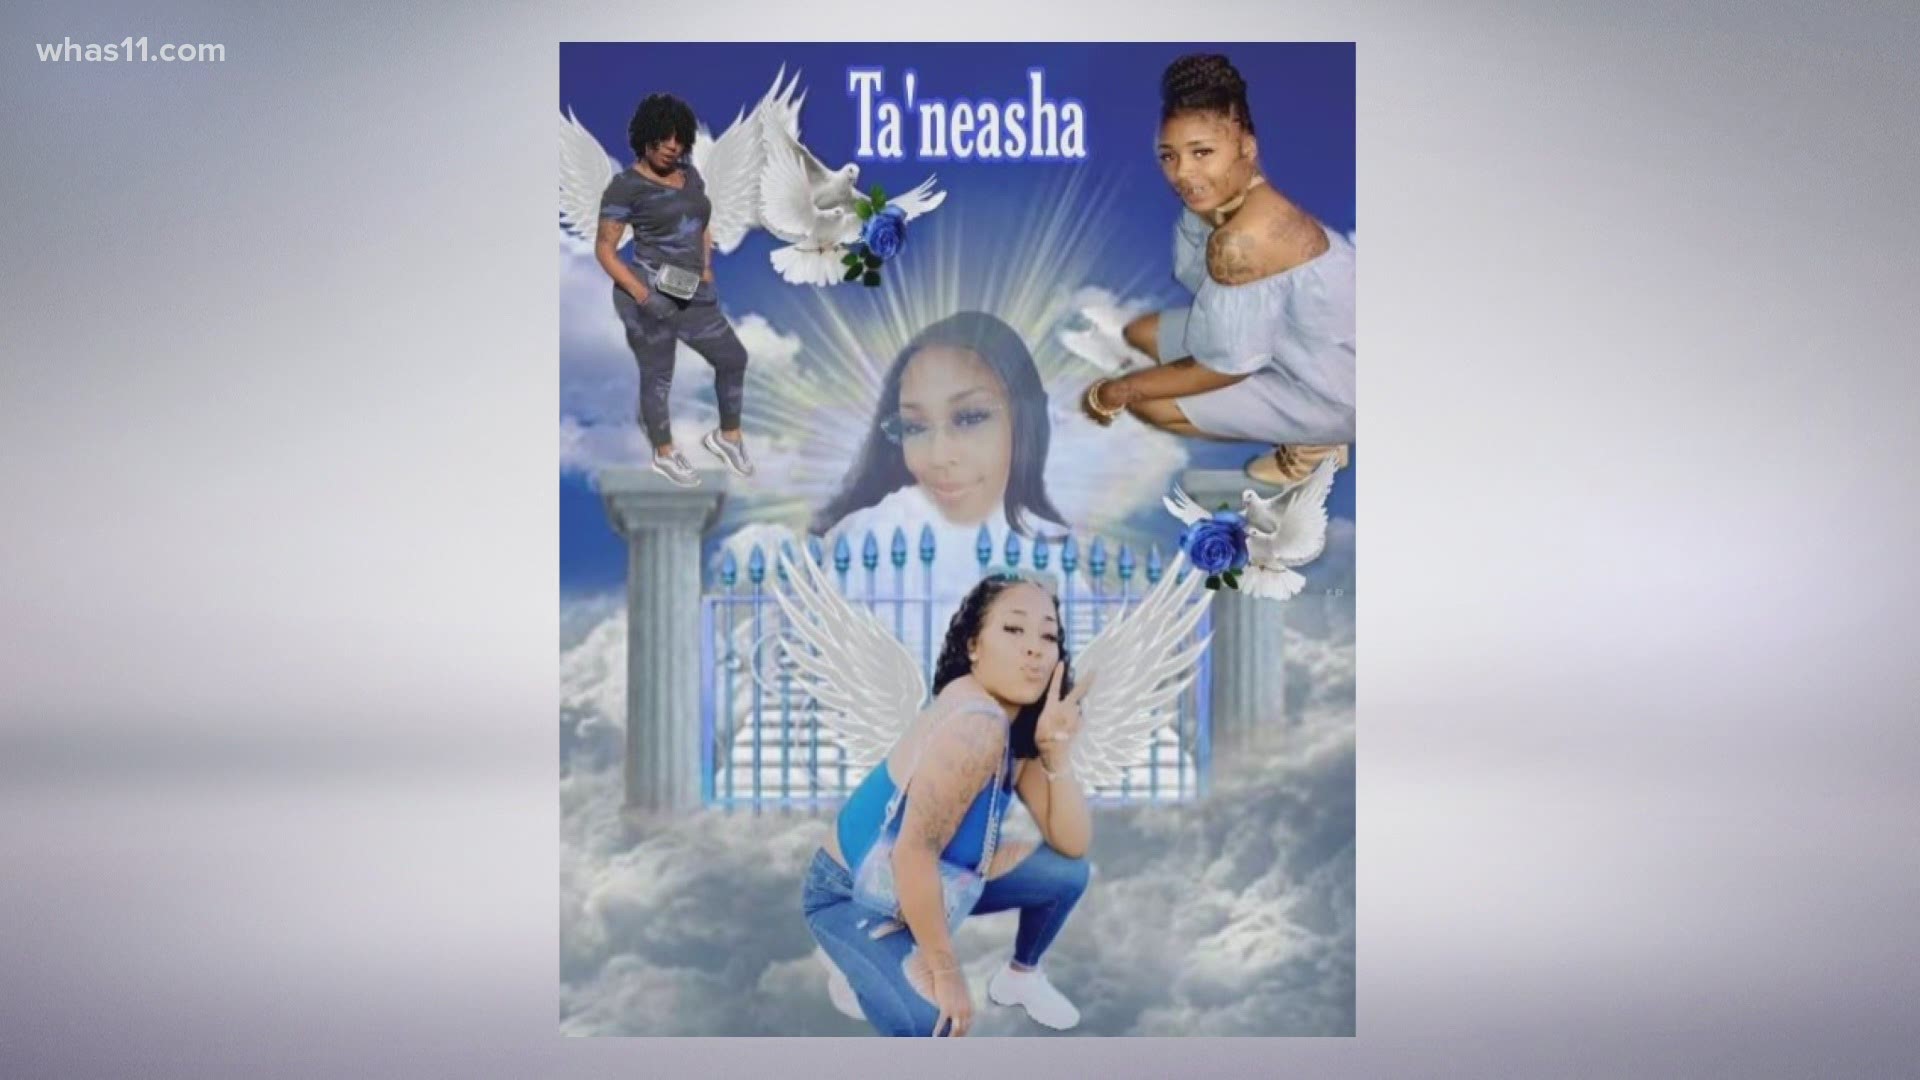 Indiana State Police said they are conducting the investigation after Ta'Neasha Chappell died shortly after being transported from the jail to a Seymour hospital.